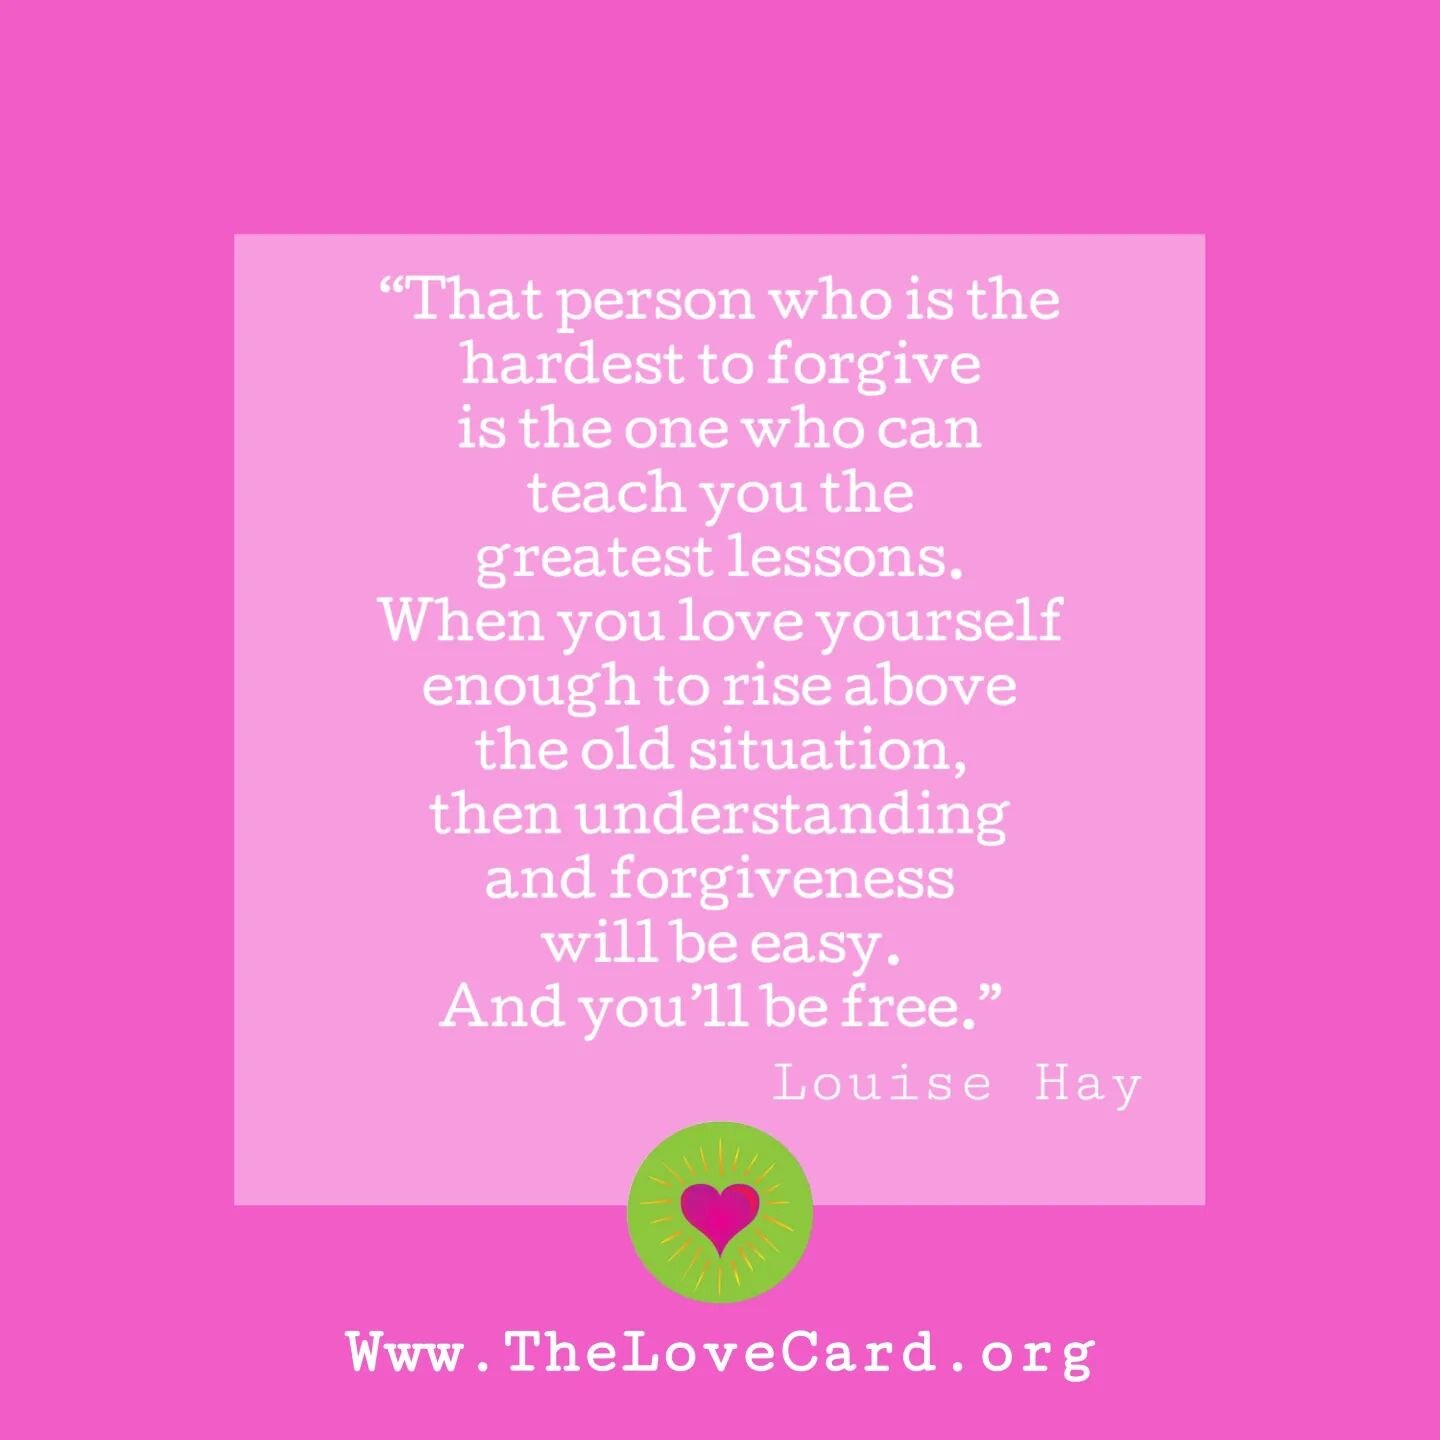 Louise Hay is powerful. She has the incredible ability to communicate so clearly what it means to forgive and love. This is a great quote. Sending you all my love. I believe in people. I believe in the goodness of hearts. I believe we are all doing o